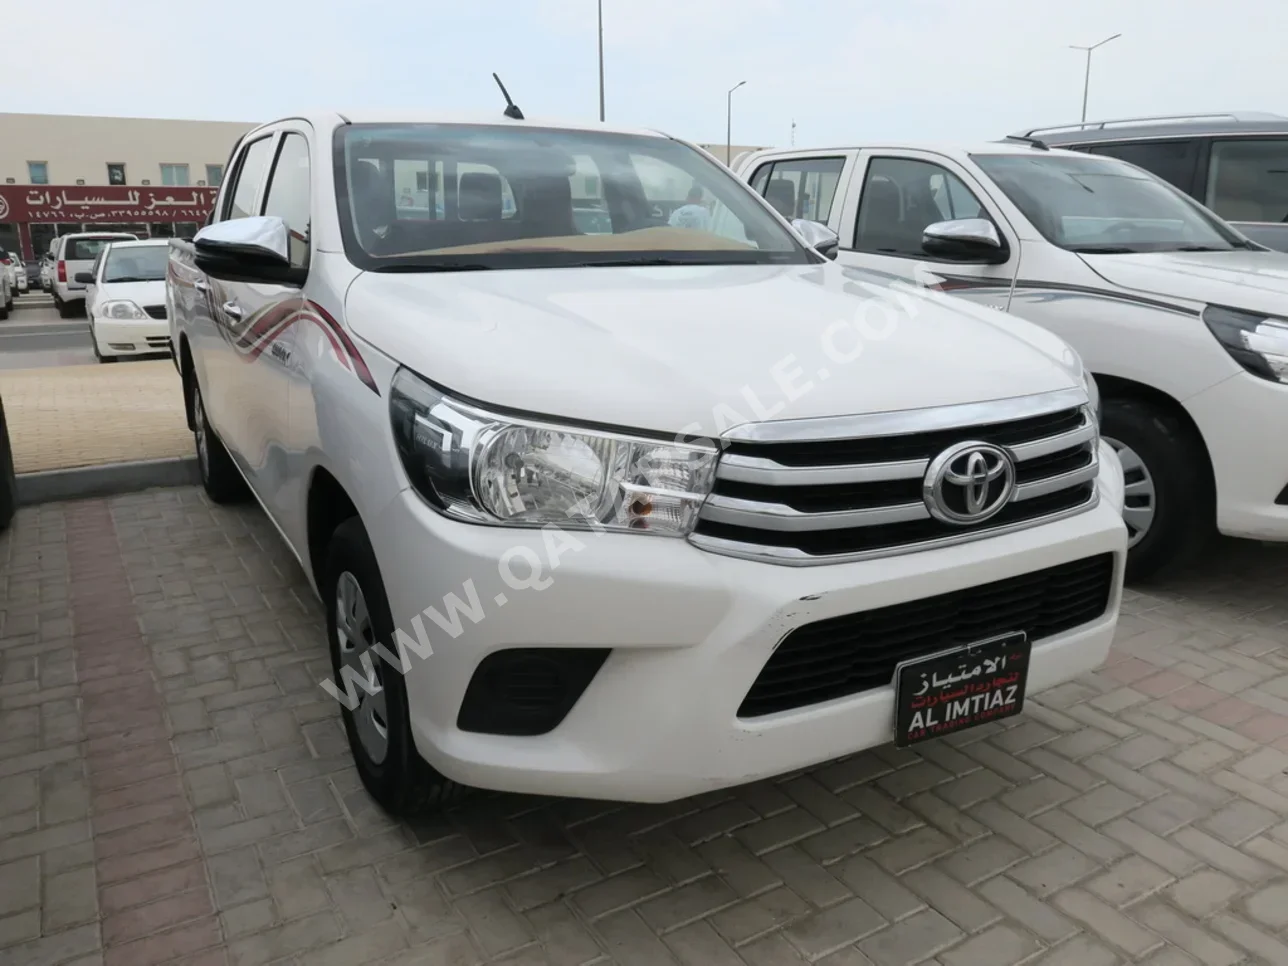 Toyota  Hilux  2021  Manual  124,000 Km  4 Cylinder  Front Wheel Drive (FWD)  Pick Up  White